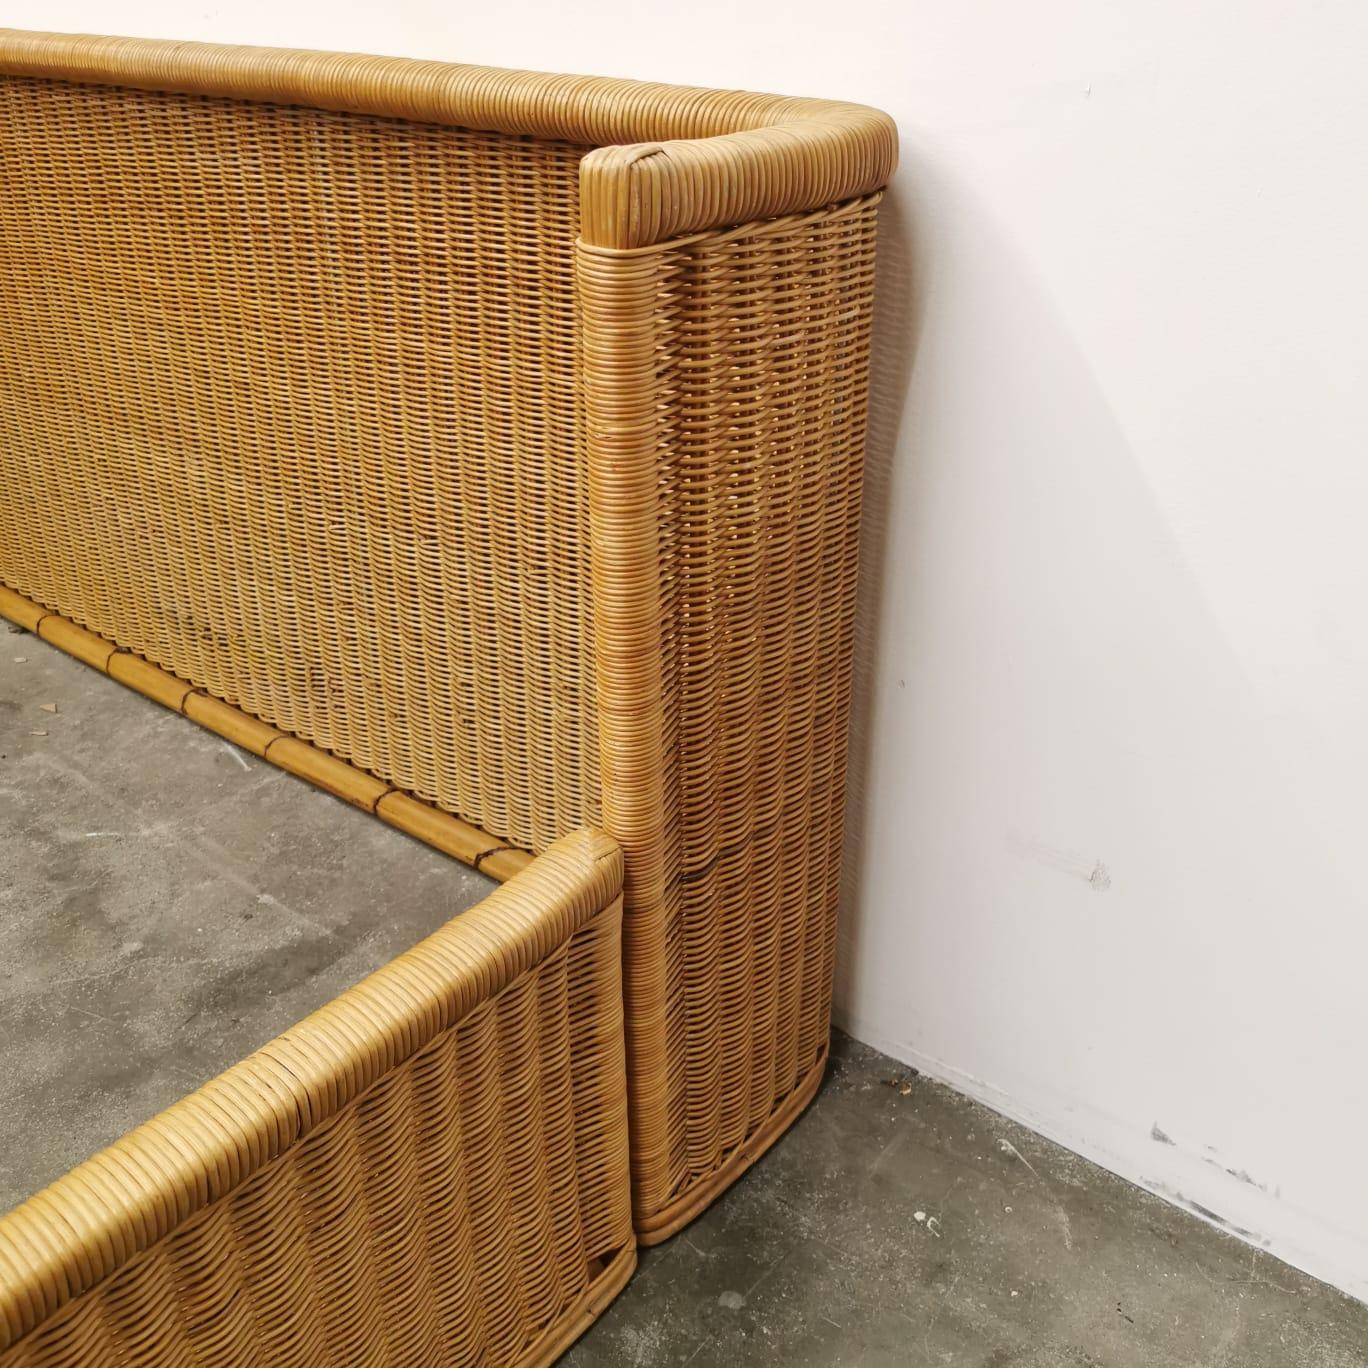 A wicker bed, a curious and unusual object, design by Adalberto Dal Lago. He has numerous publications on architecture, design, decoration to his credit; he edited the magazine 